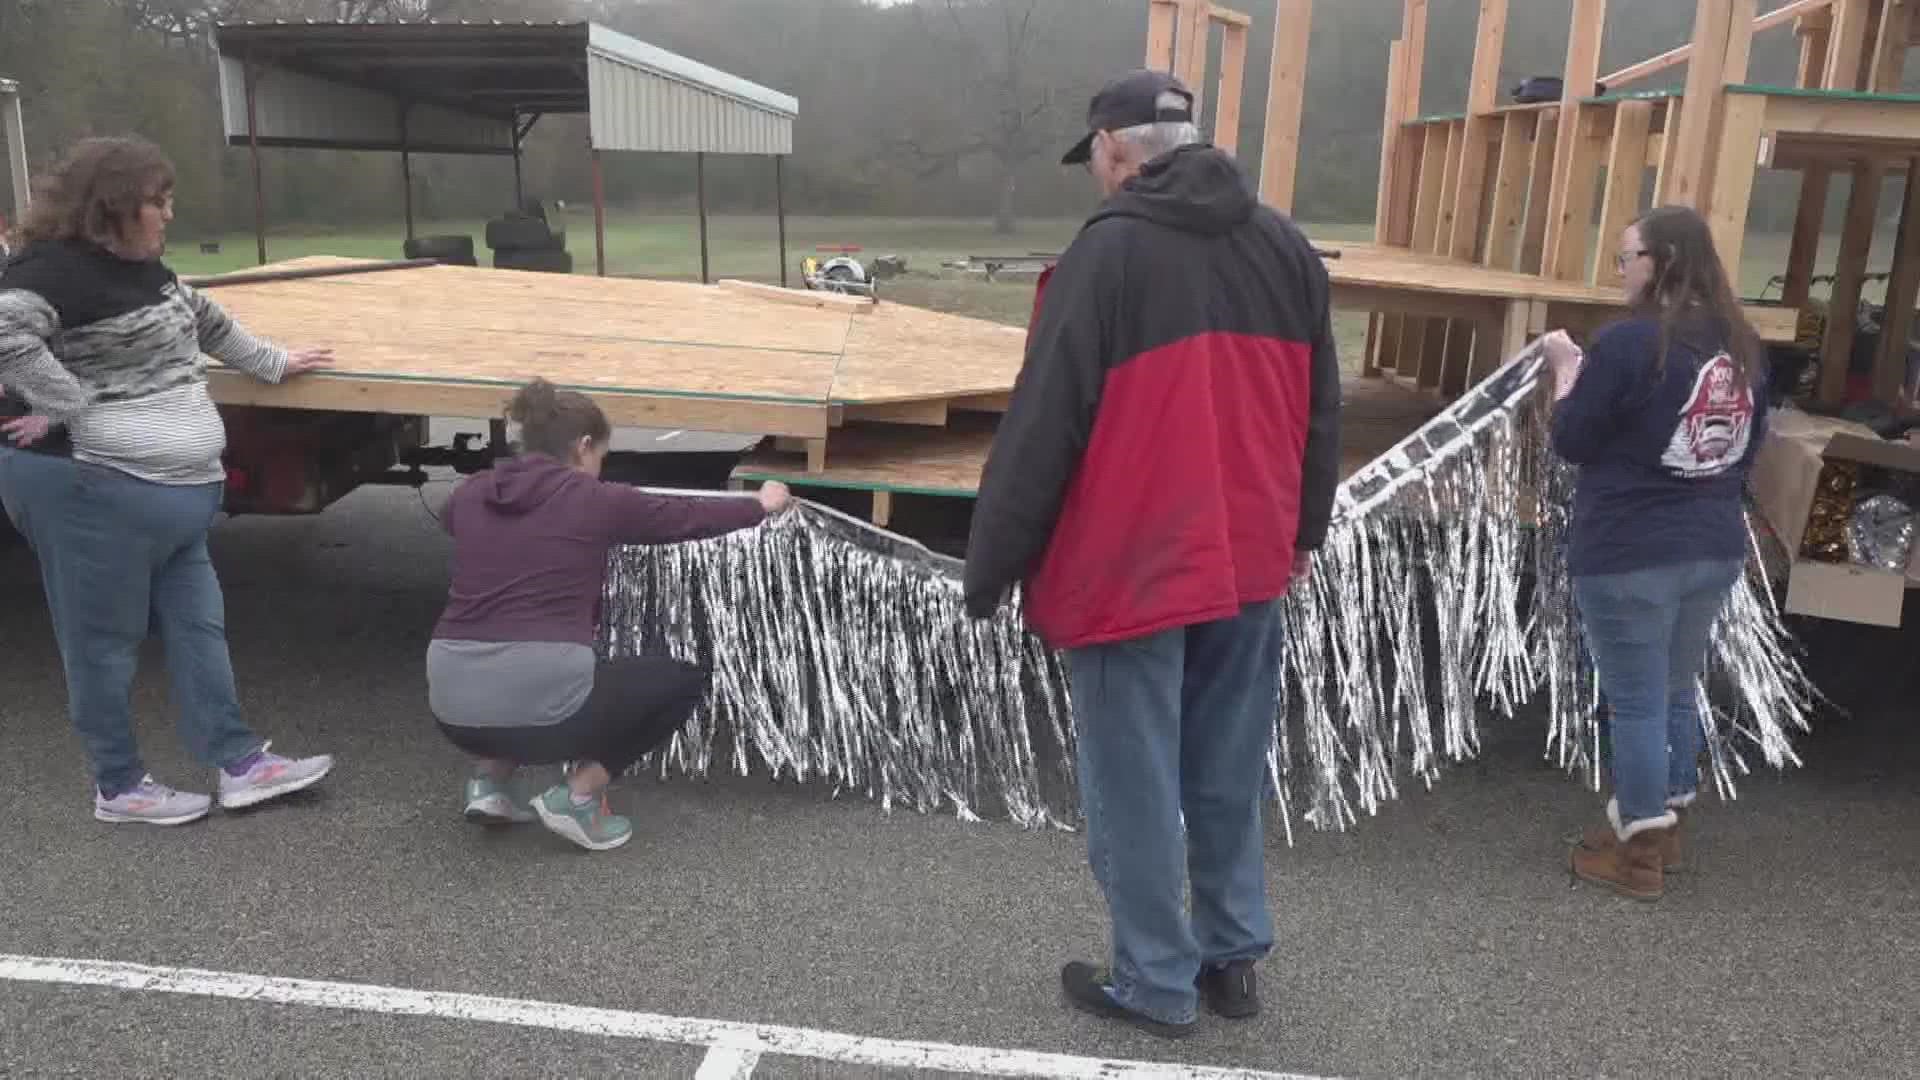 The Taylor's Valley Baptist Church in Temple wants to share the hard work they've put into their float for the 76th annual Temple Christmas Parade and Tree Lighting.